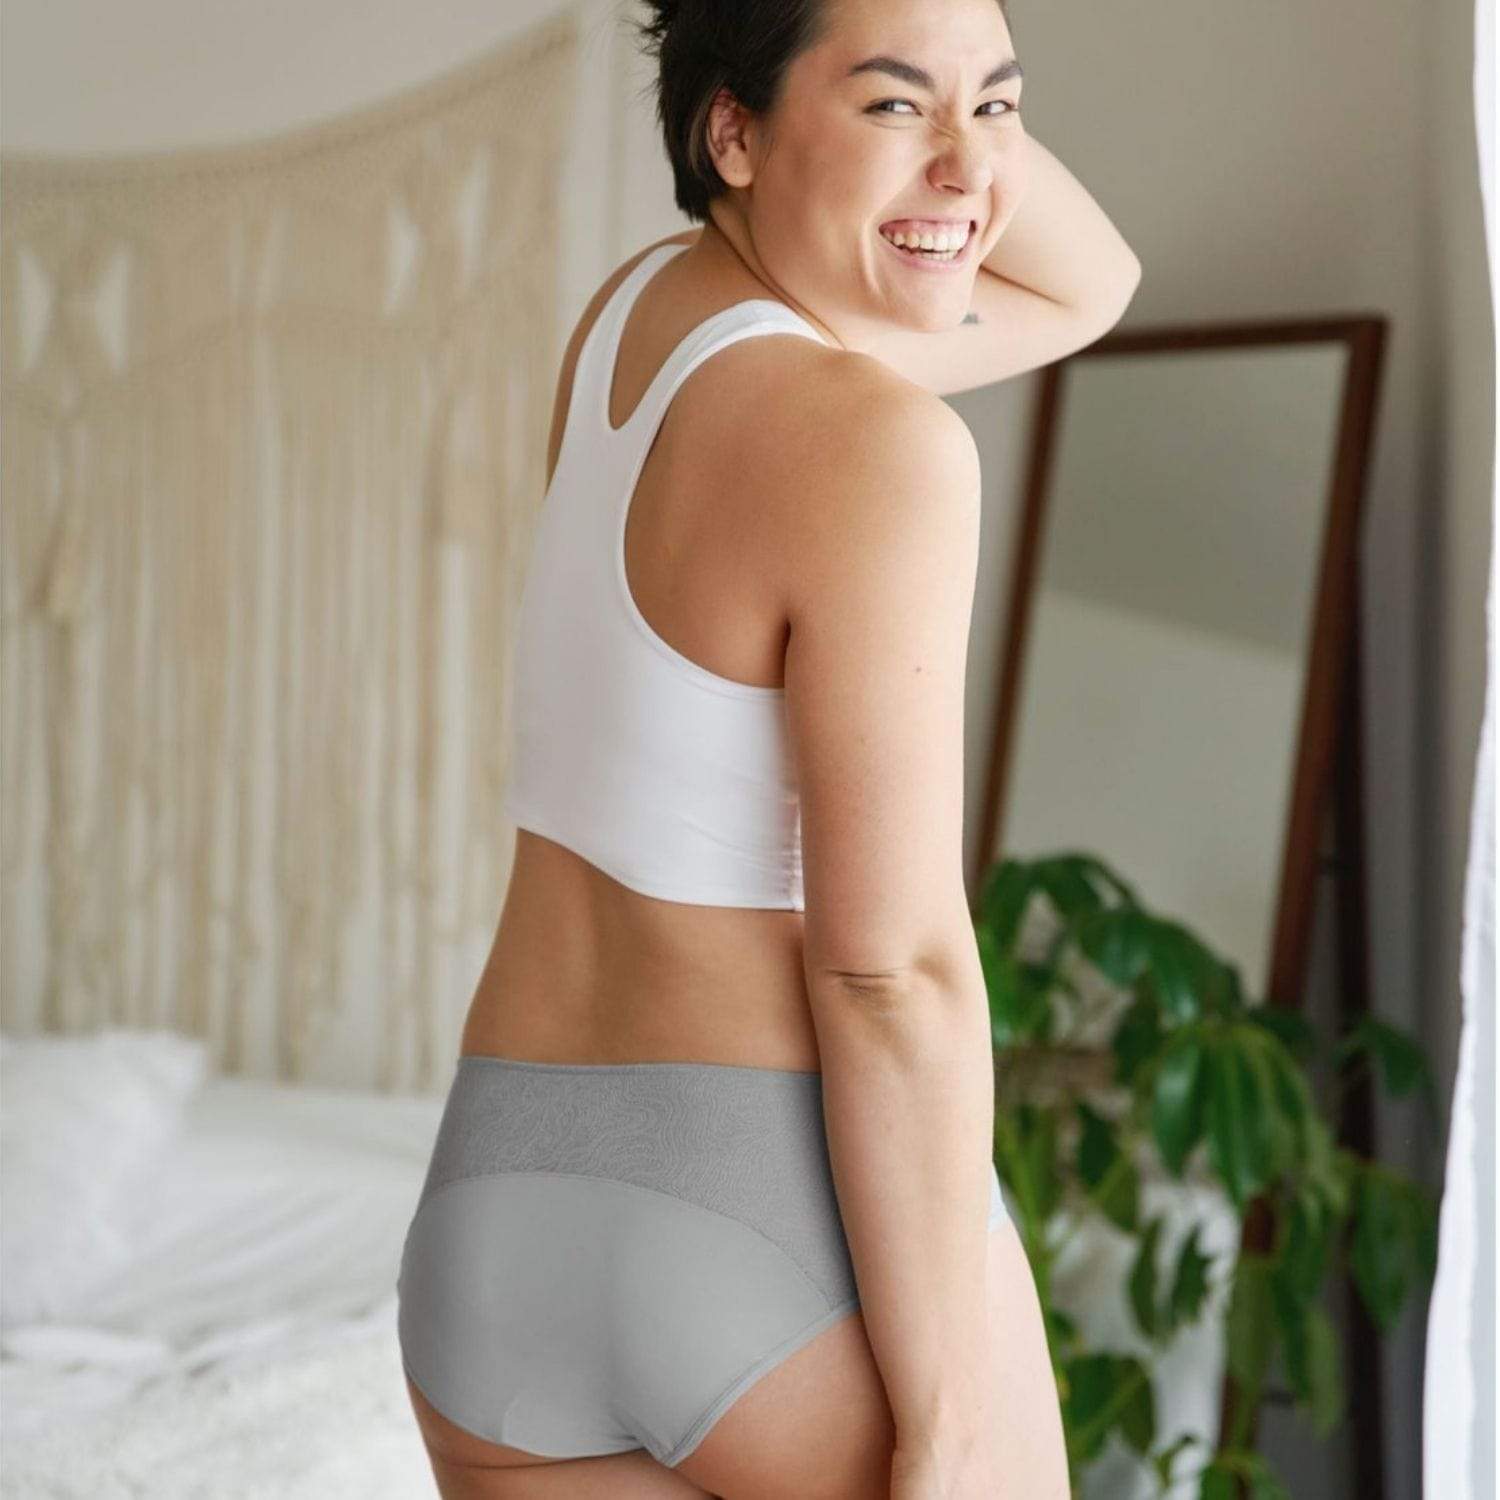 Saalt Reusable Period Underwear - Comfortable, Thin, and Keeps You